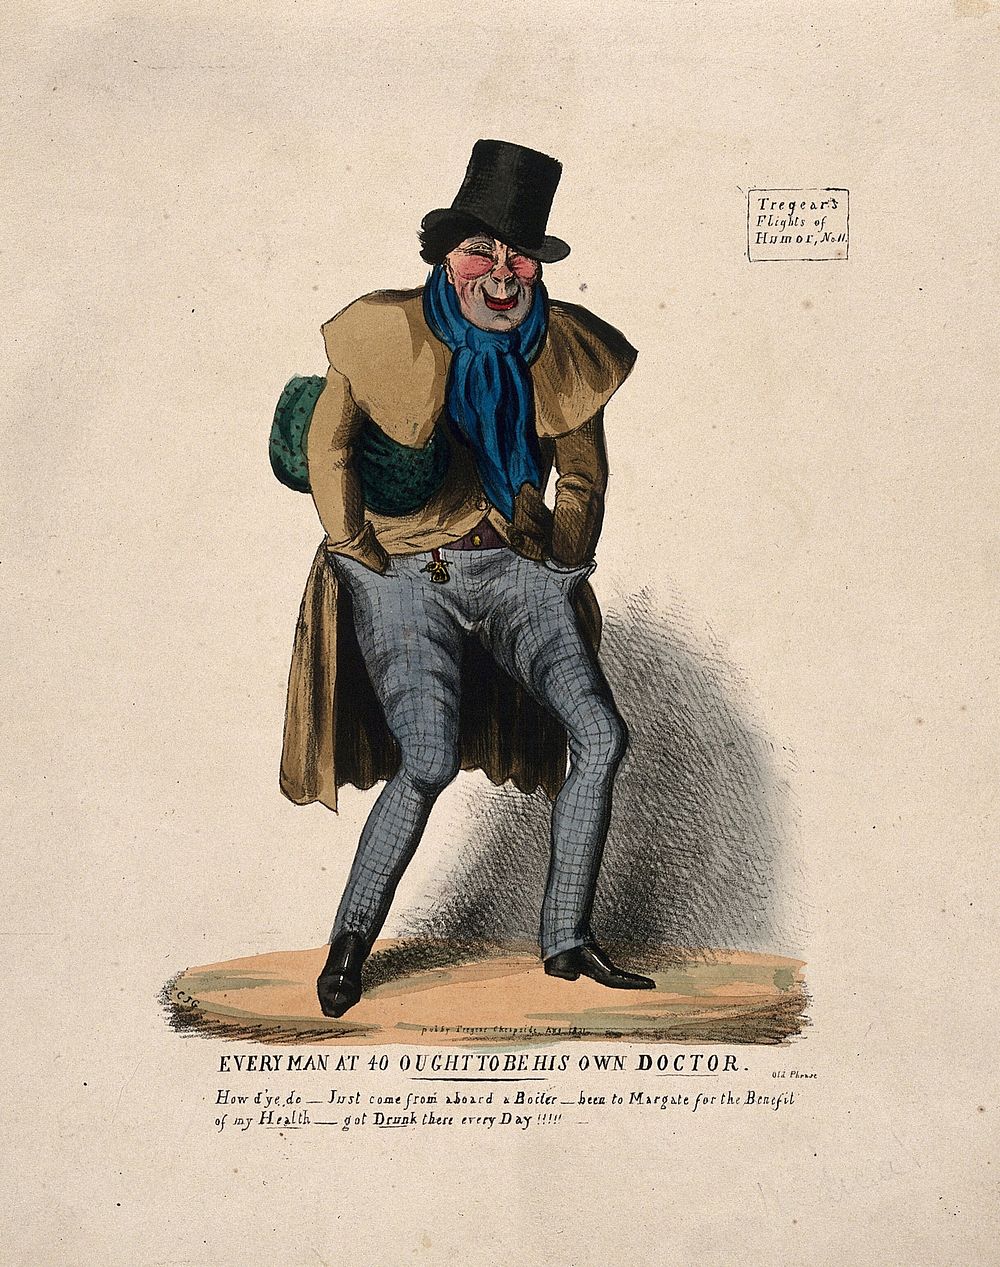 A man with flushed cheeks, perhaps from fever or alcohol. Coloured lithograph by C.J. Grant, 1831.